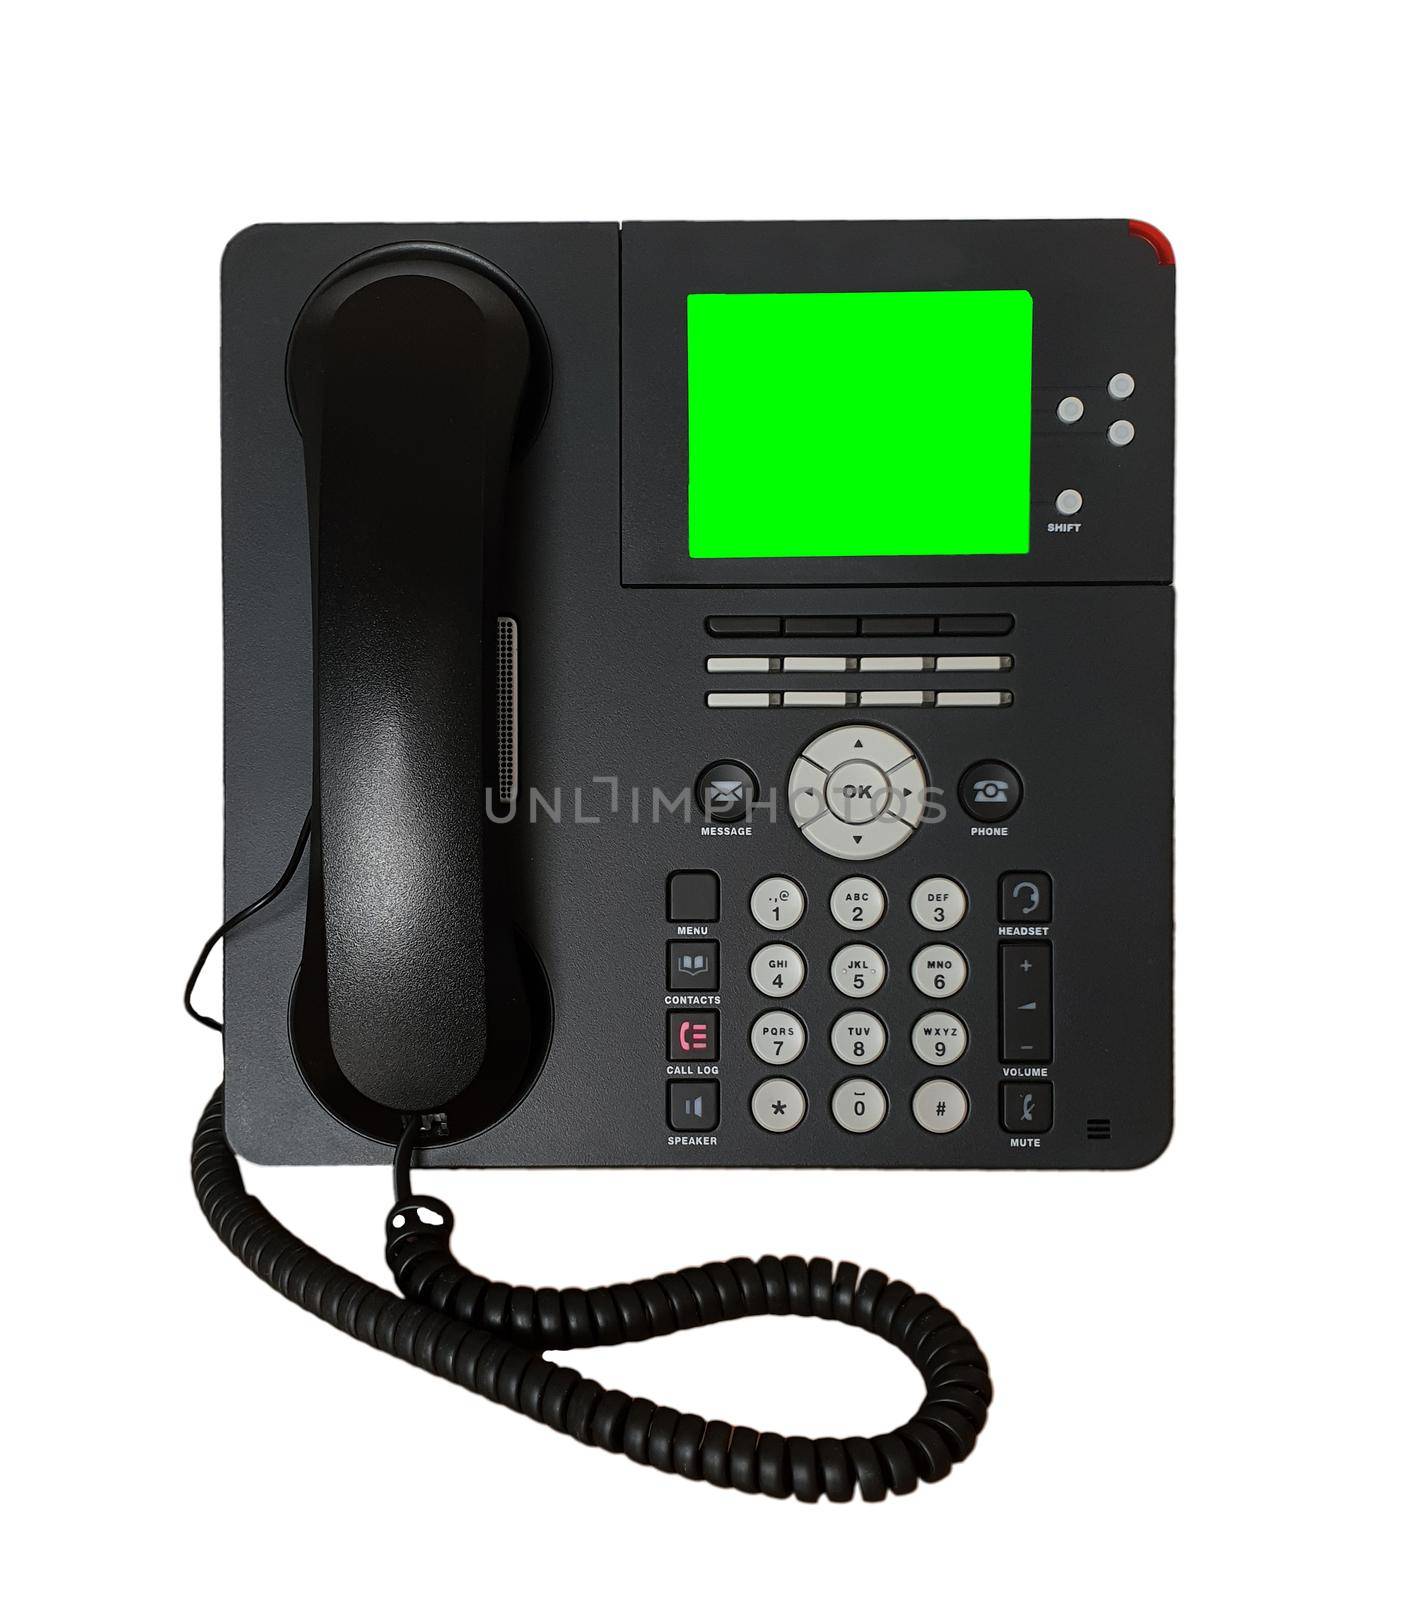 Office black IP telephone with green screen by hamik